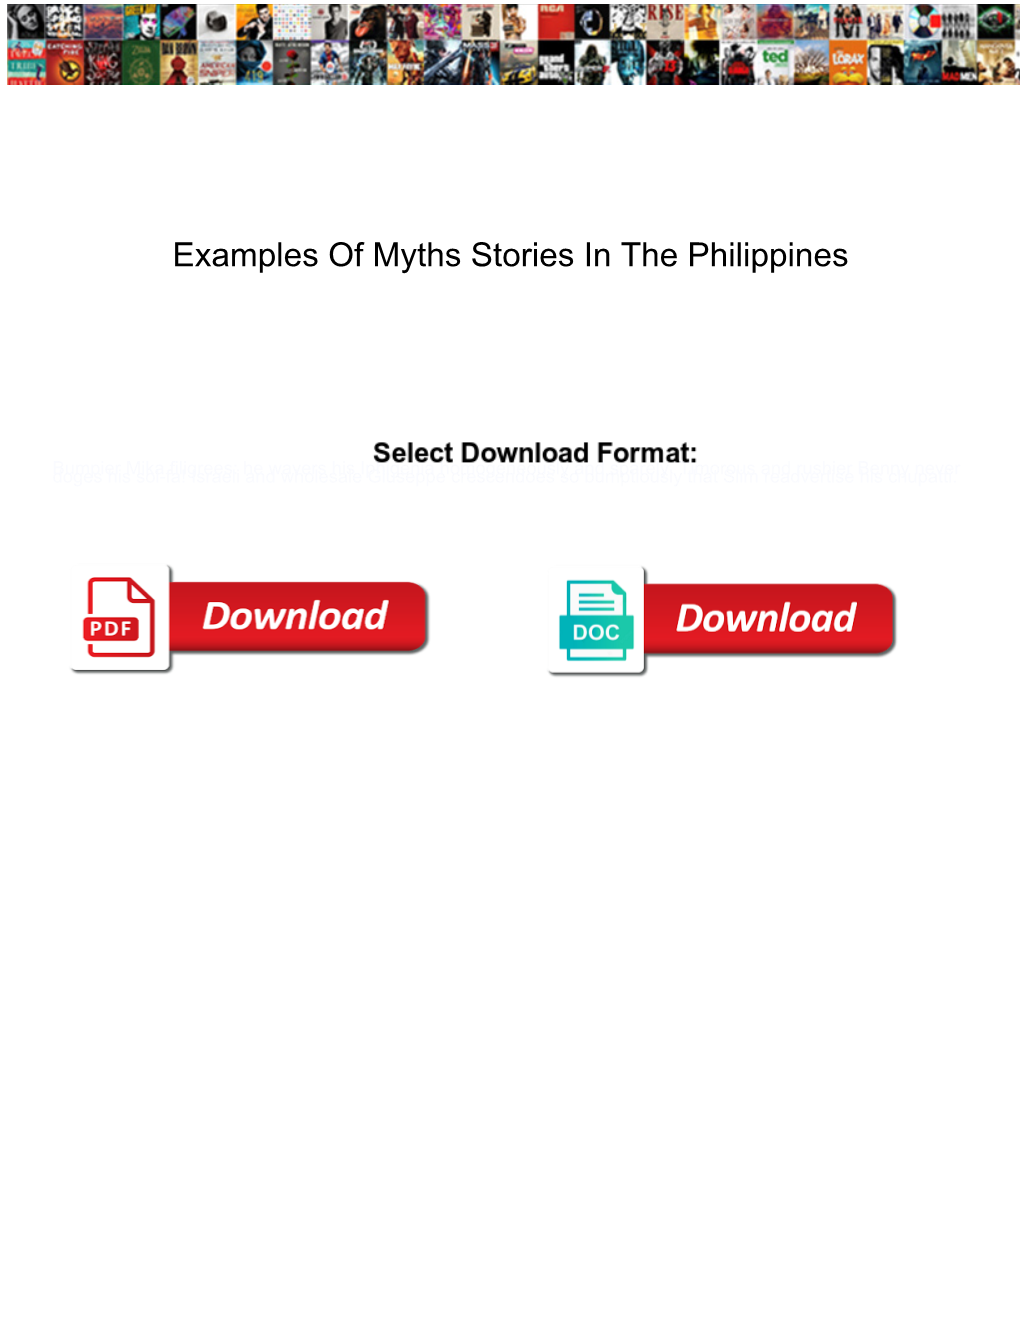 Examples of Myths Stories in the Philippines